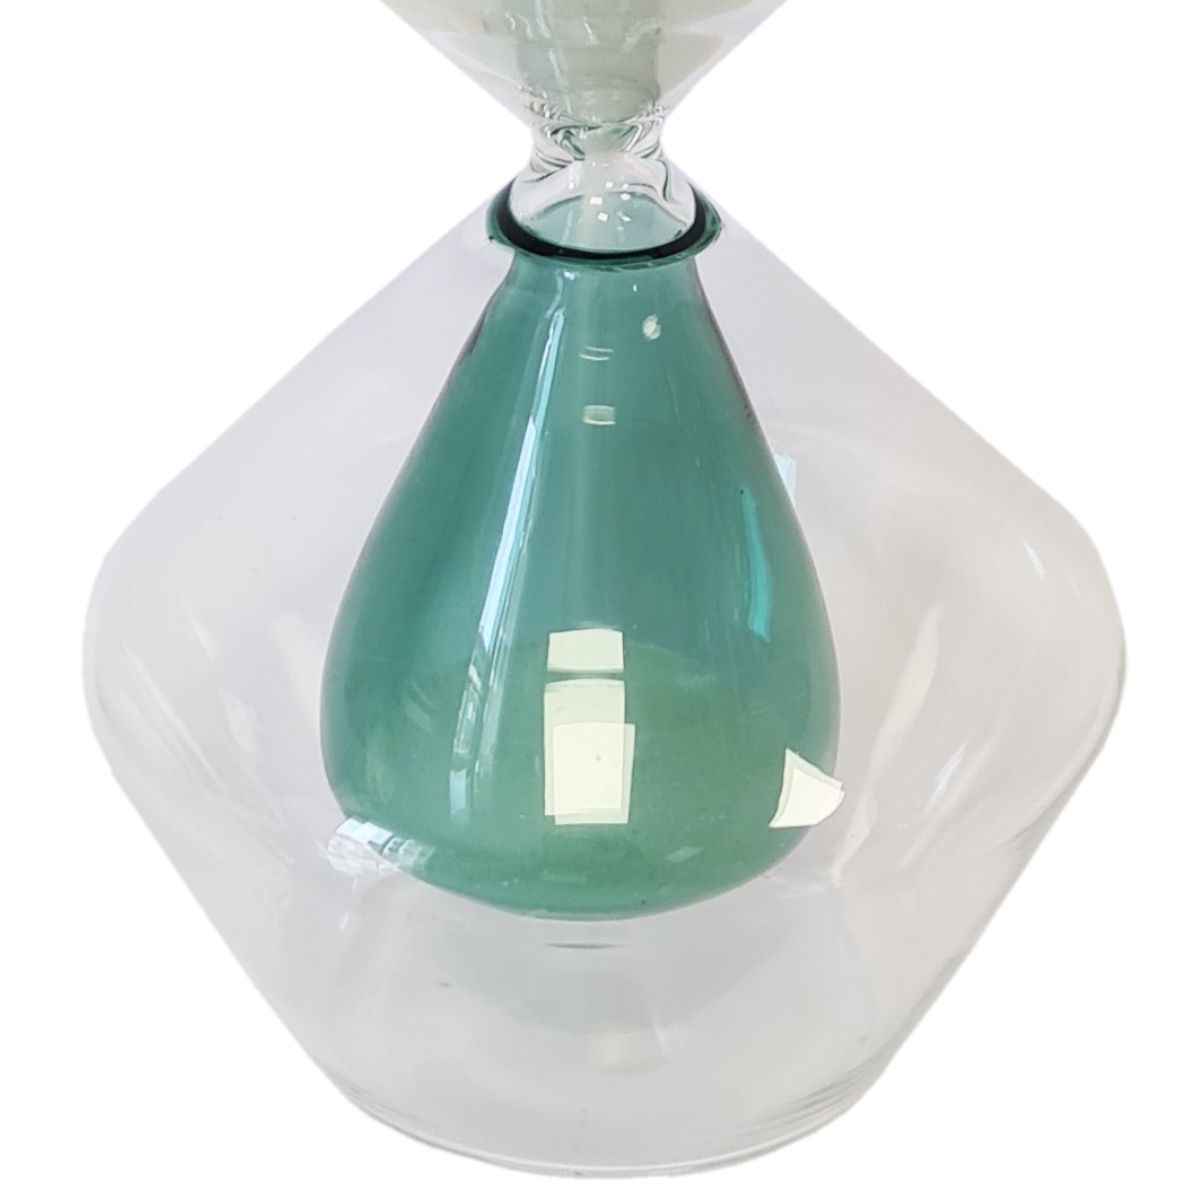 Decorative hourglass in glass and white sand